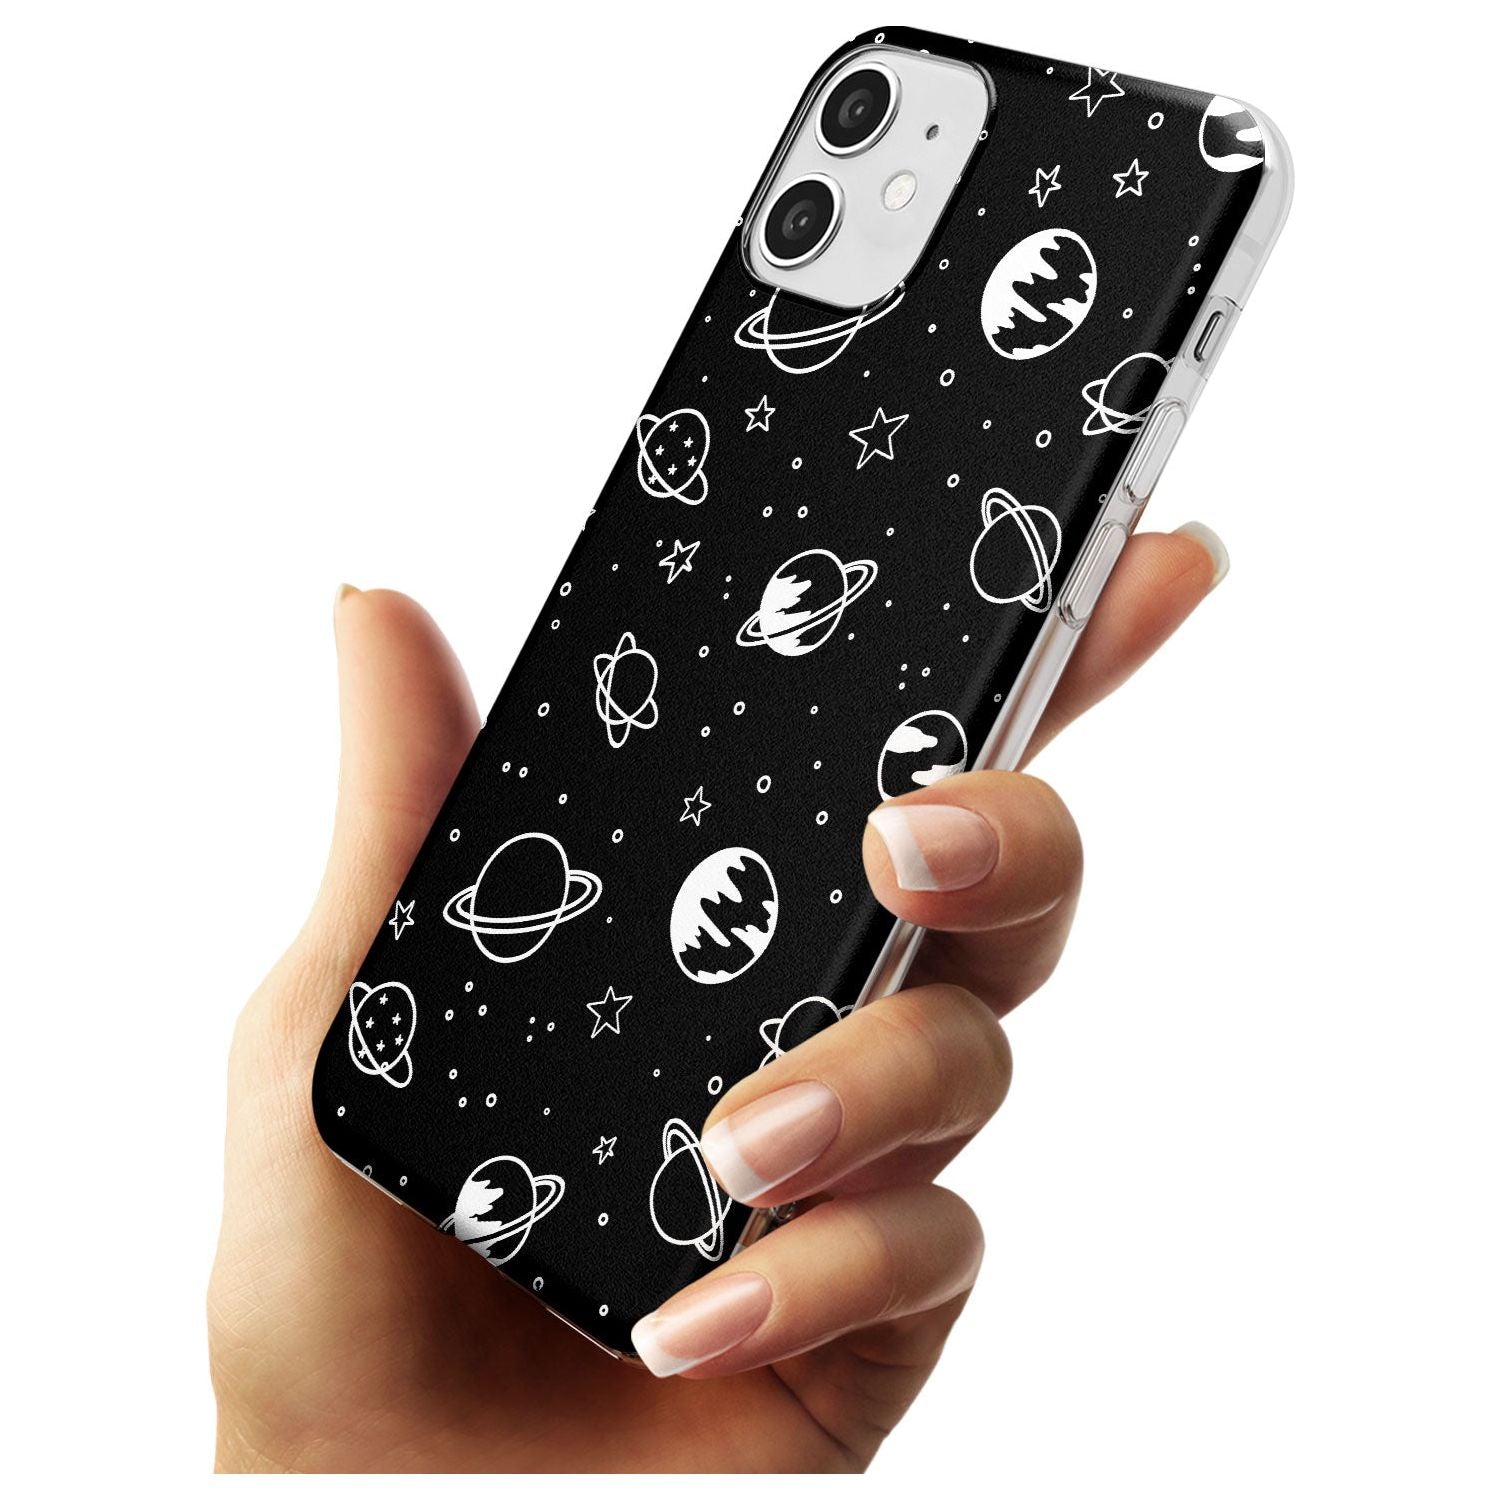 Outer Space Outlines: White on Black Black Impact Phone Case for iPhone 11